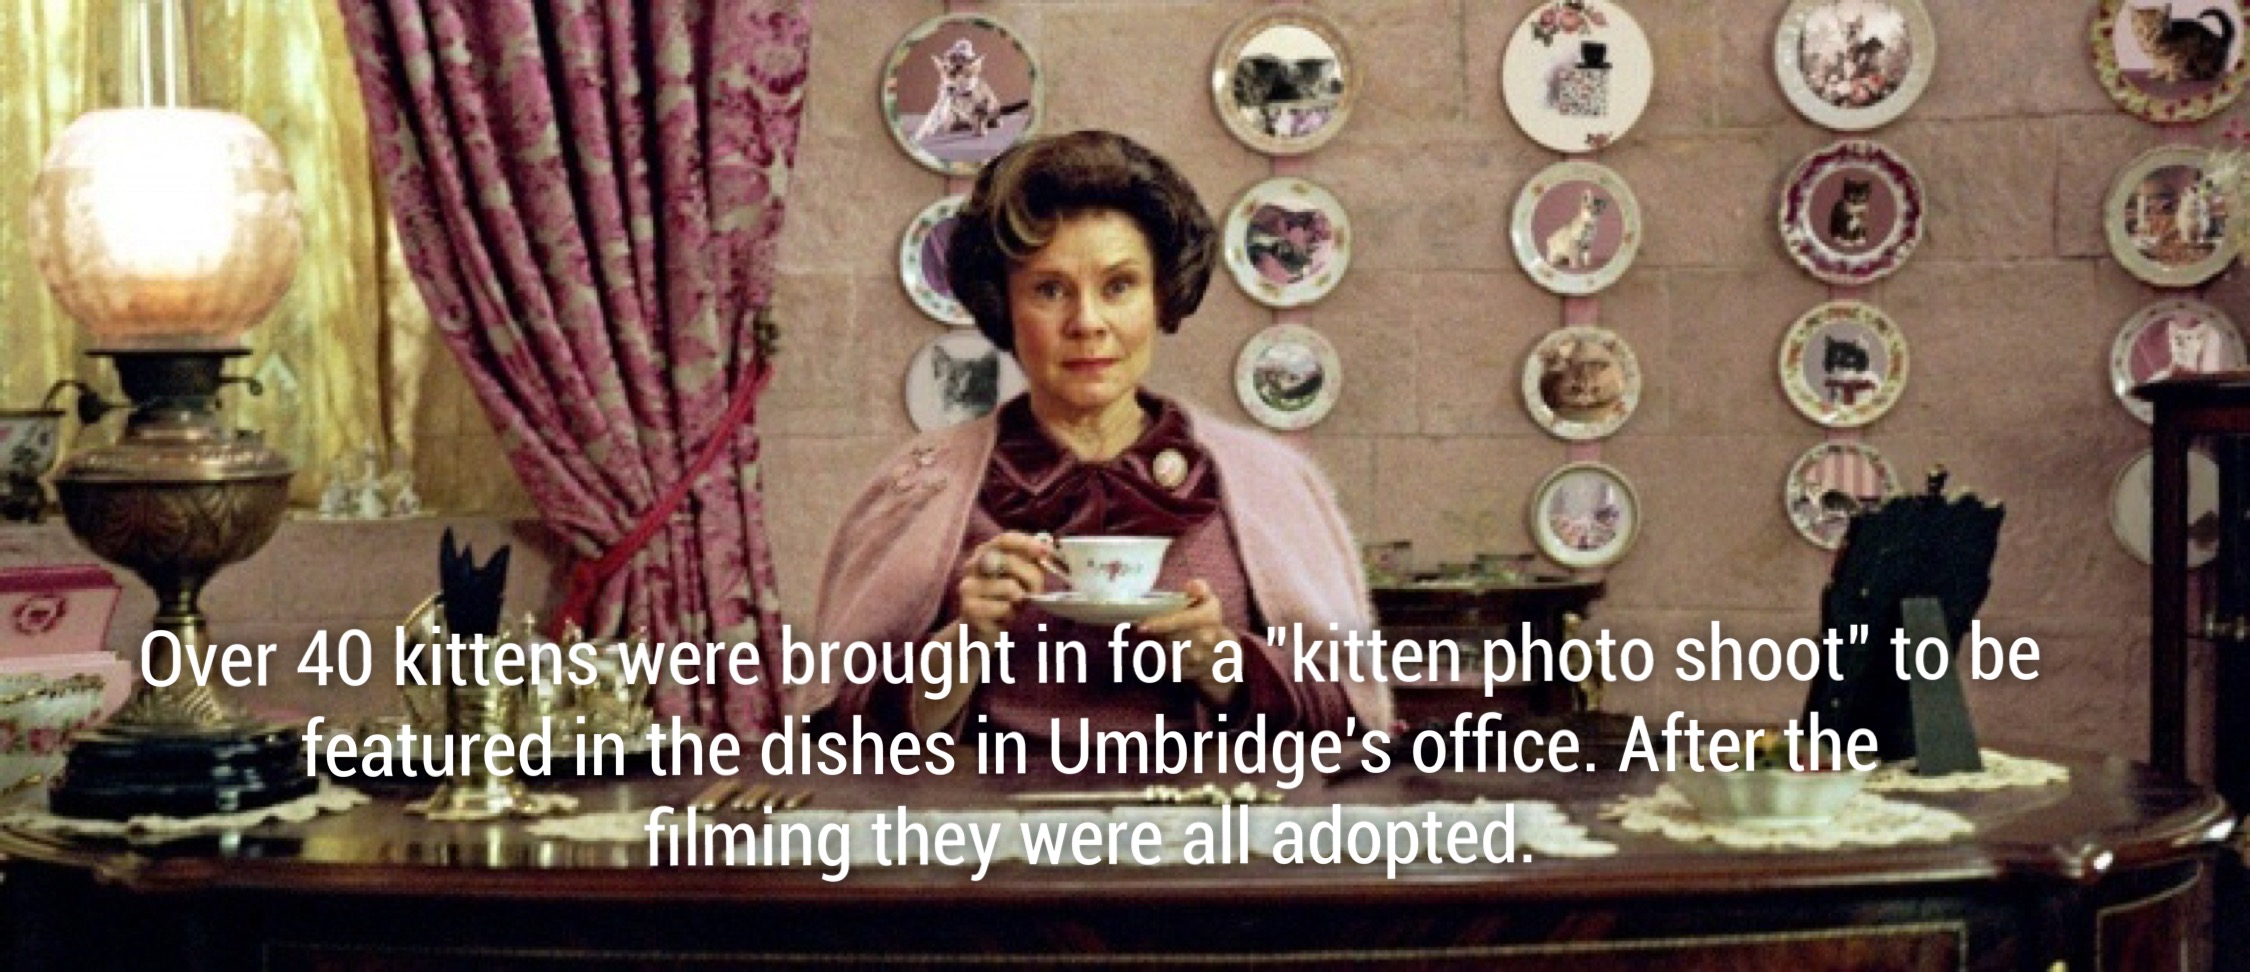 order of the phoenix umbridge - Over 40 kittens were brought in for a "kitten photo shoot" to be featured in the dishes in Umbridge's office. After the filming they were all adopted.